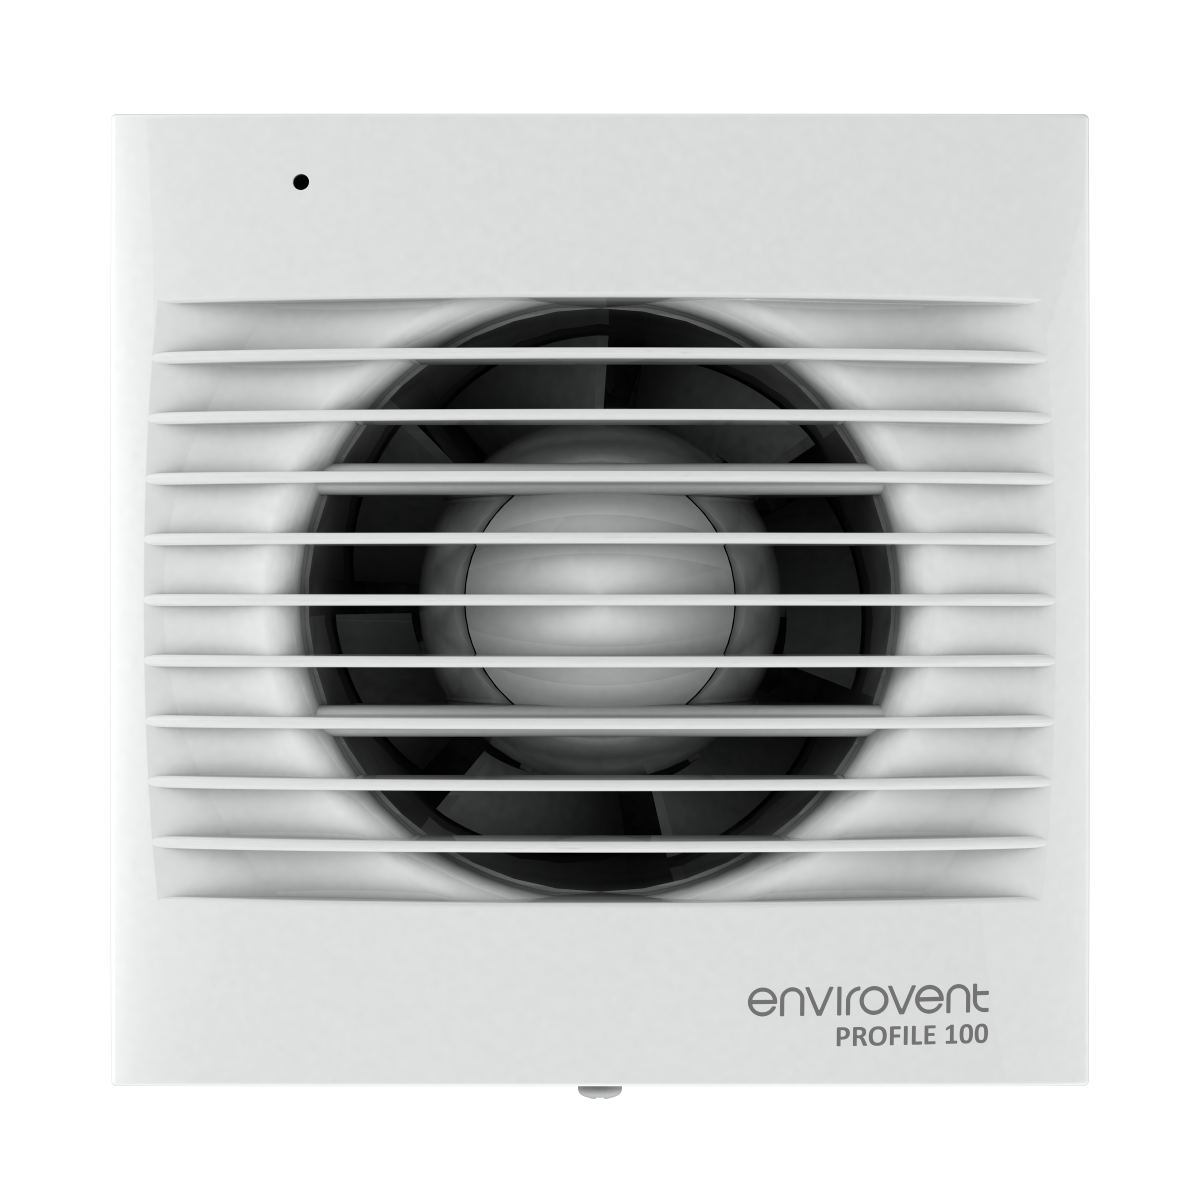 Image of an Envirovent kitchen extractor fan on a white background